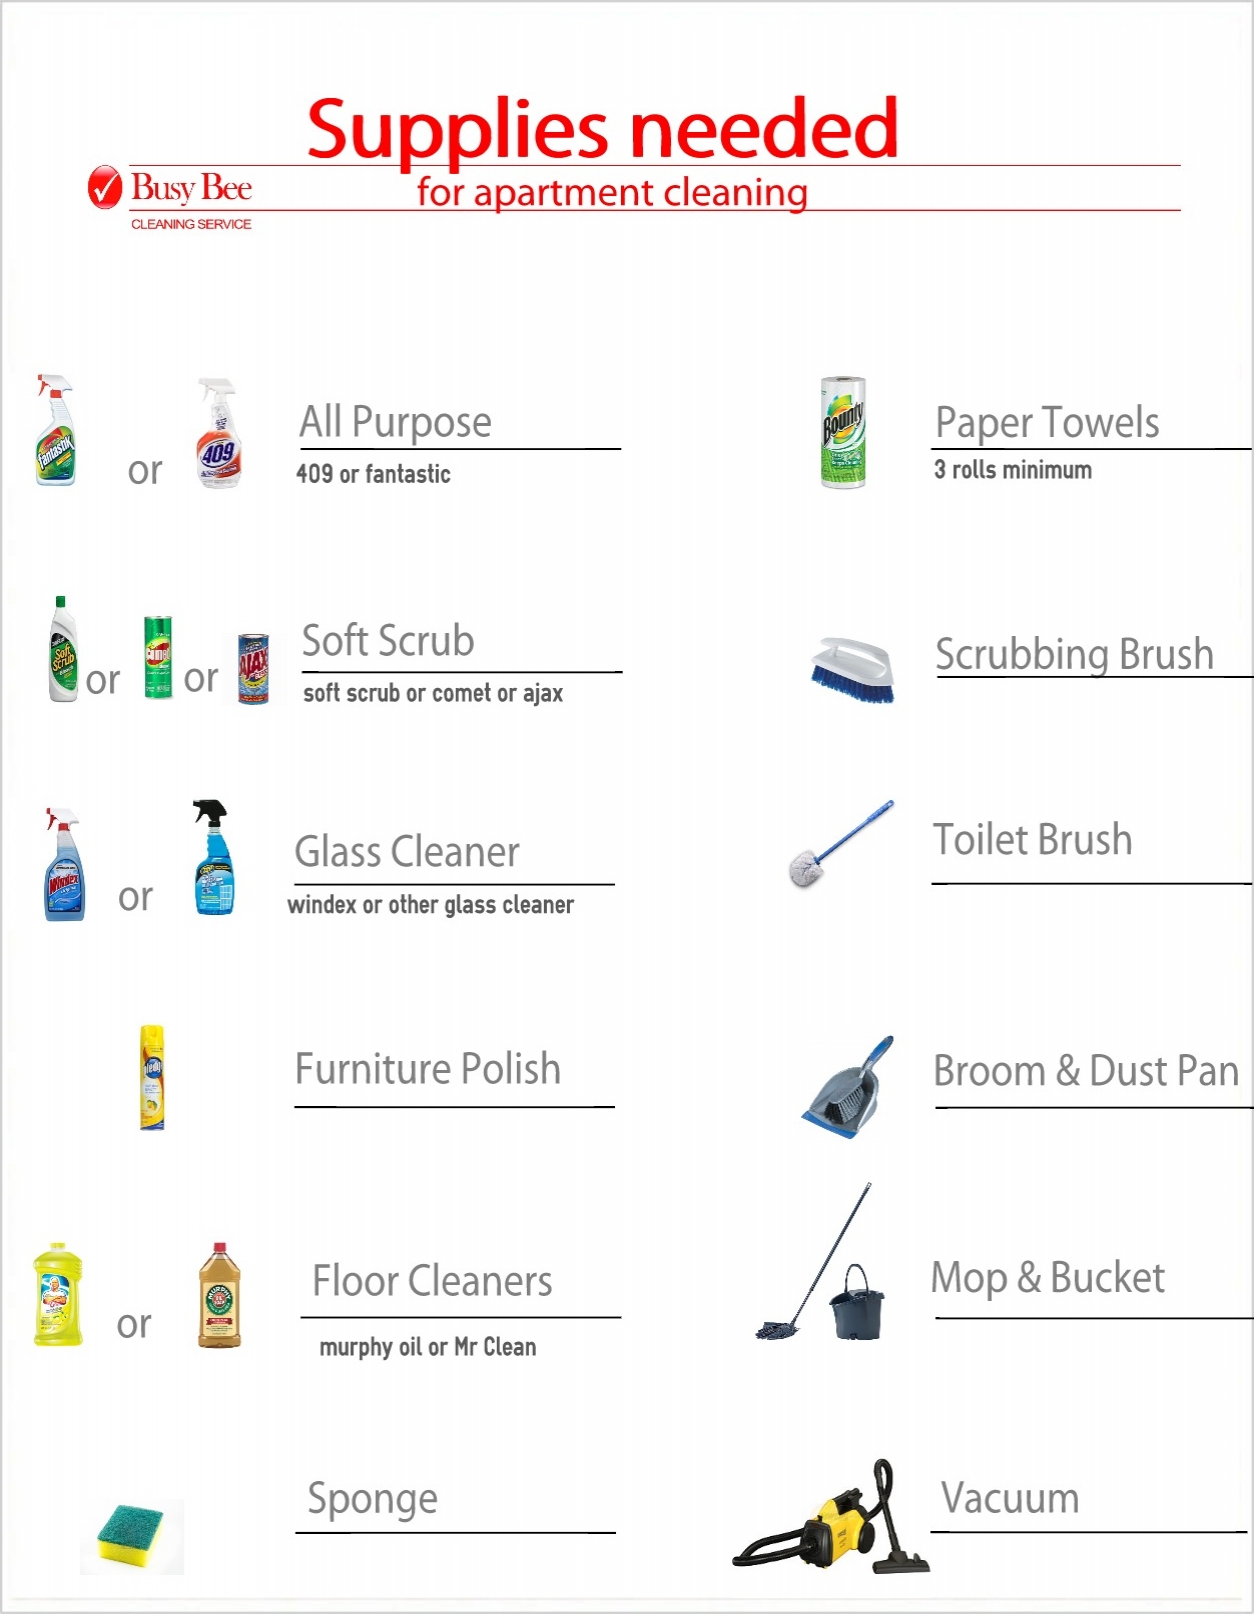 https://www.bbcleaningservice.com/wp-content/uploads/2013/08/easelly_visual-4.jpg